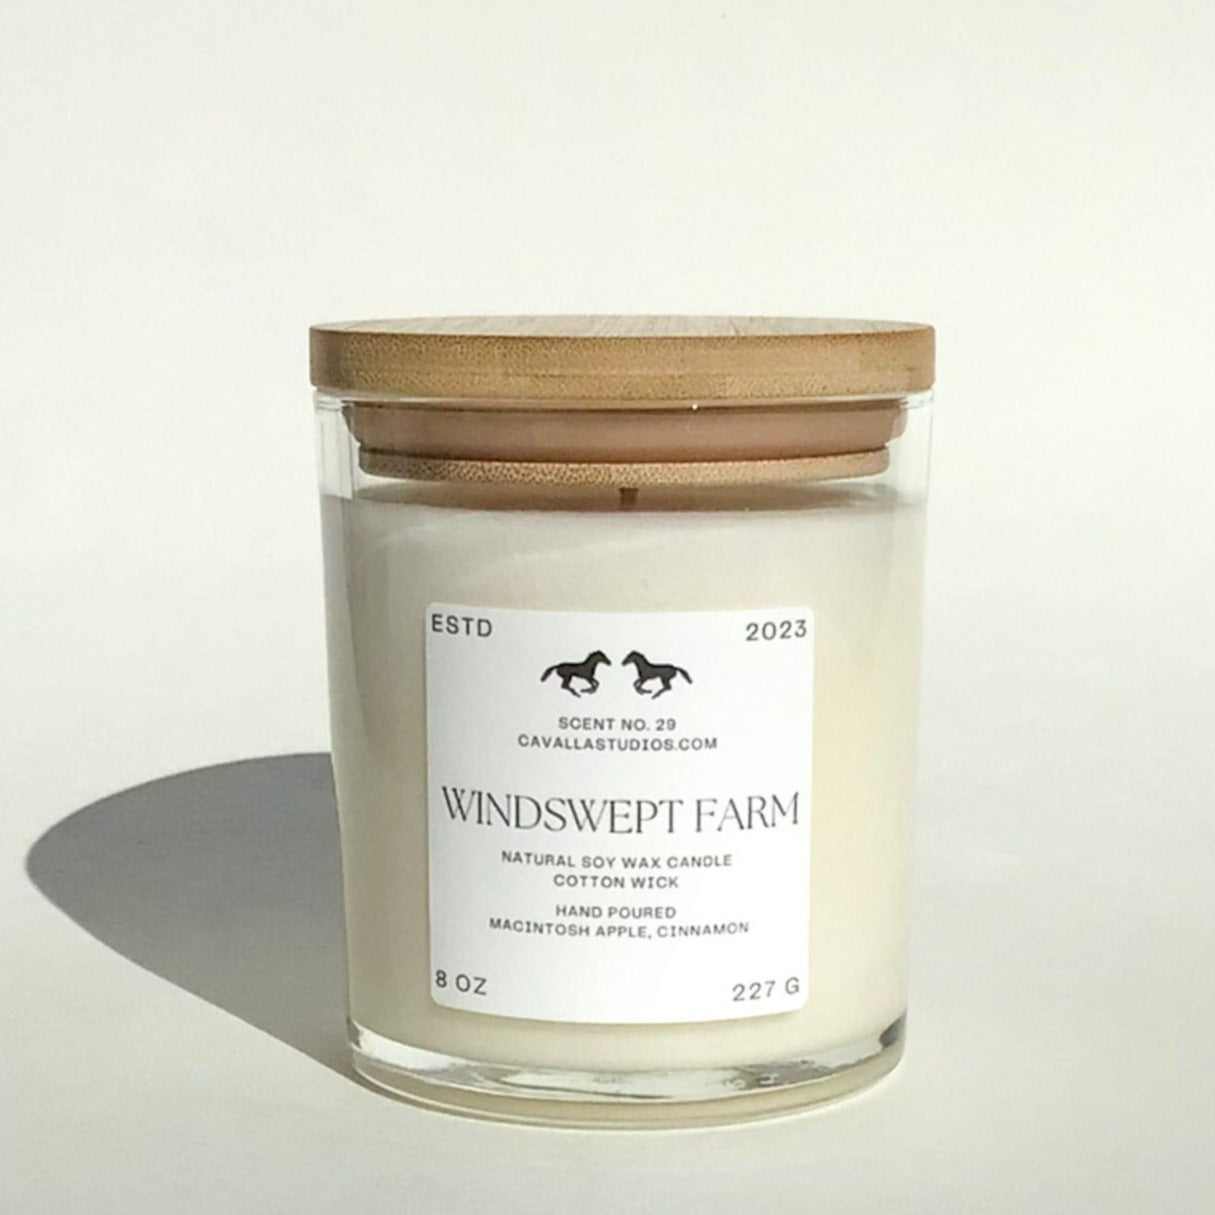 Classic white candle in a clear glass vessel covered by a bamboo lid. The glass features the 'Cavalla Studios' logo and the candle is labeled with the scent name 'Windswept Farm.'